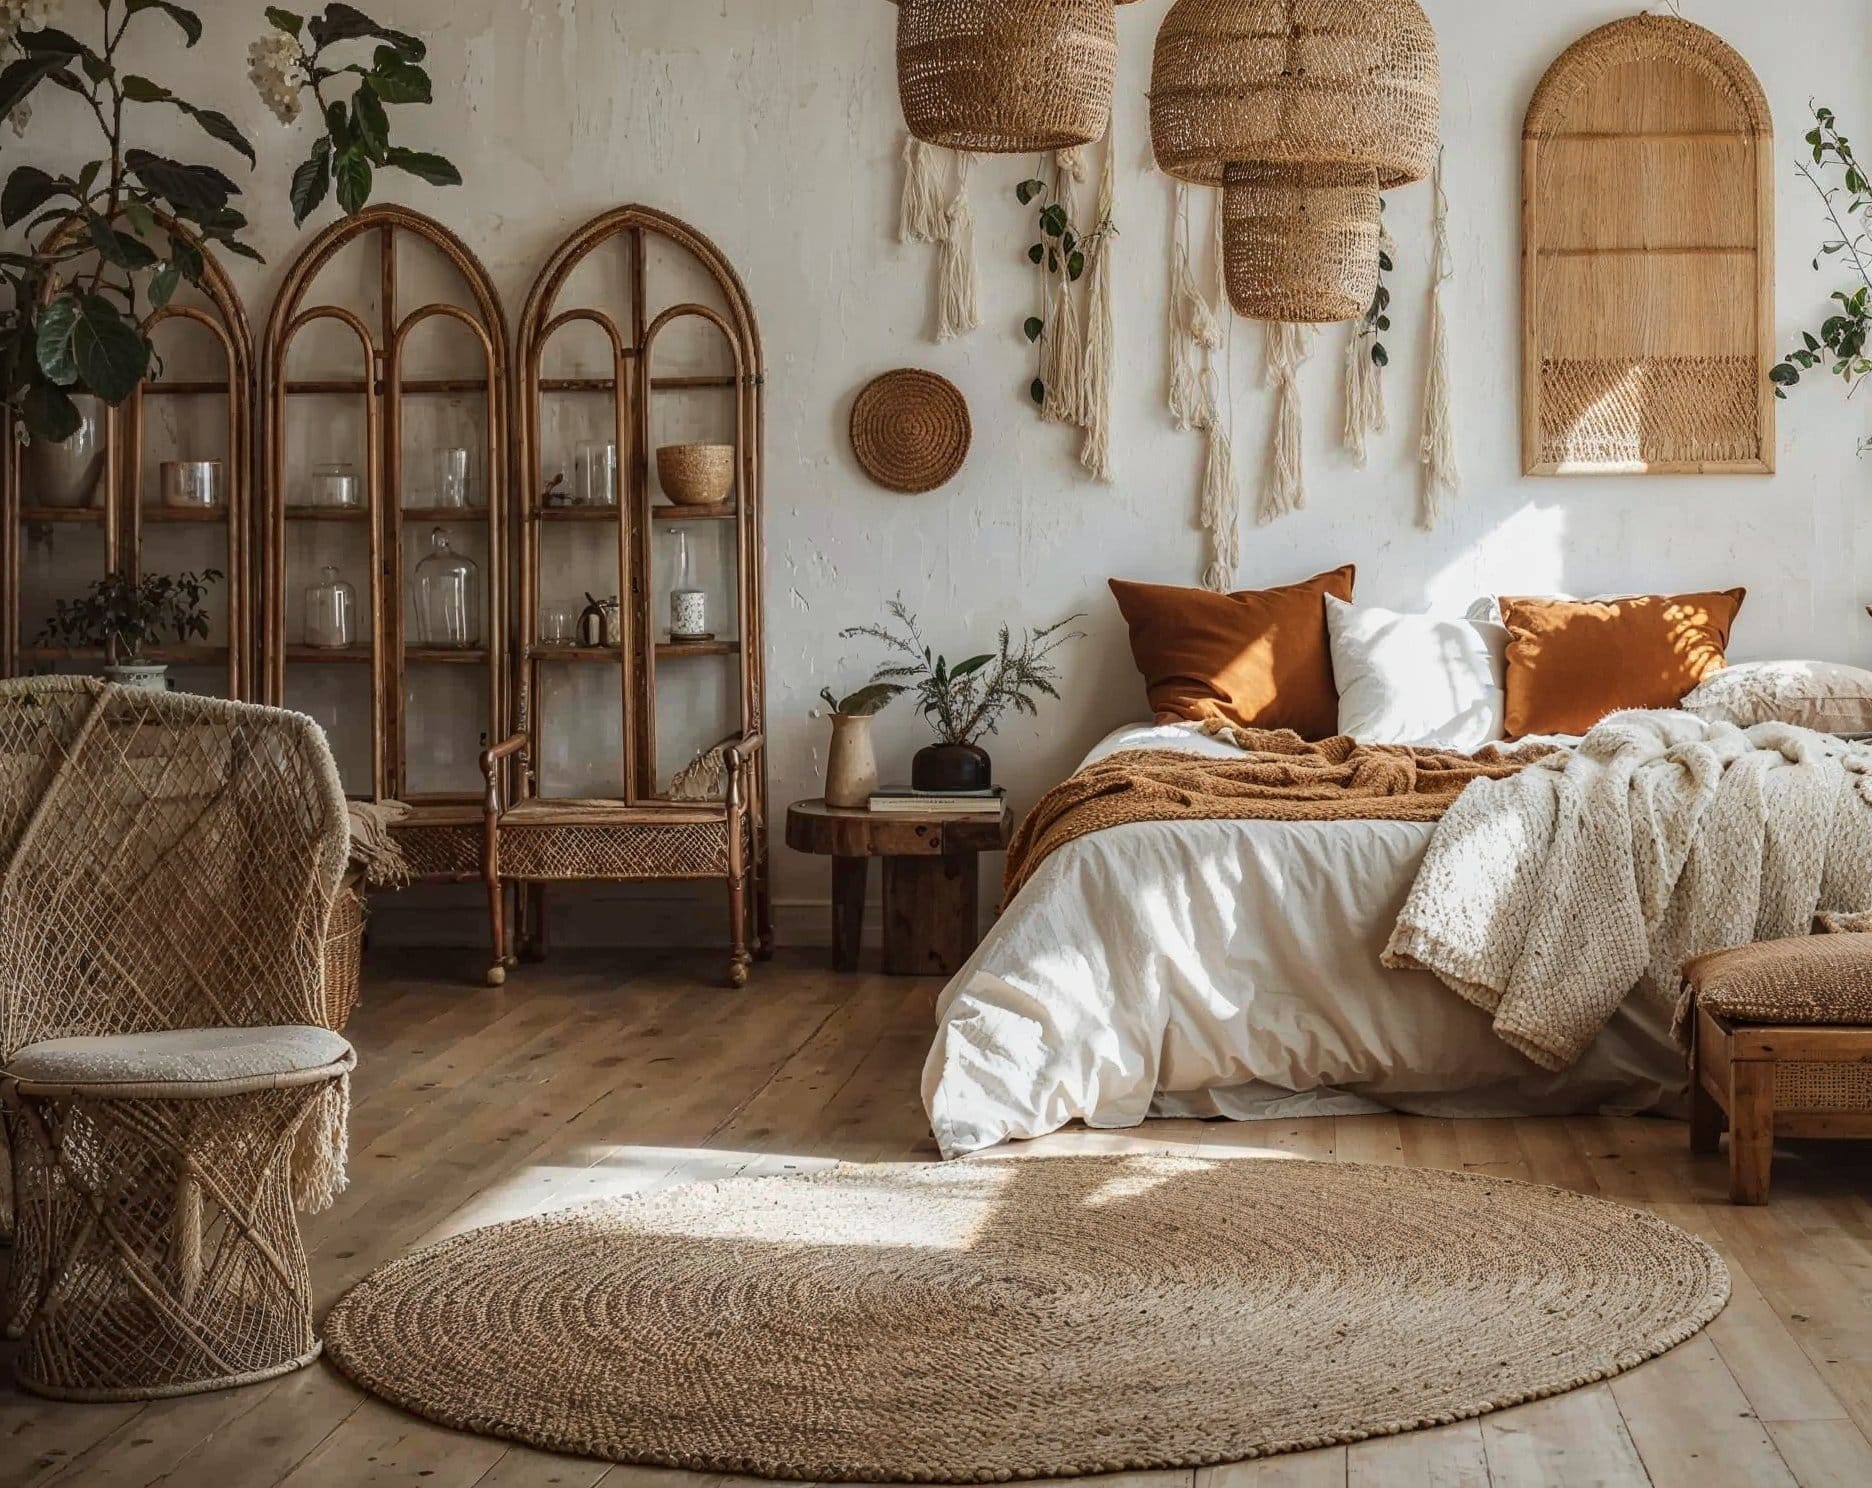 How Do Boho Nightstands Fit Into the Overall Boho Decor Style?